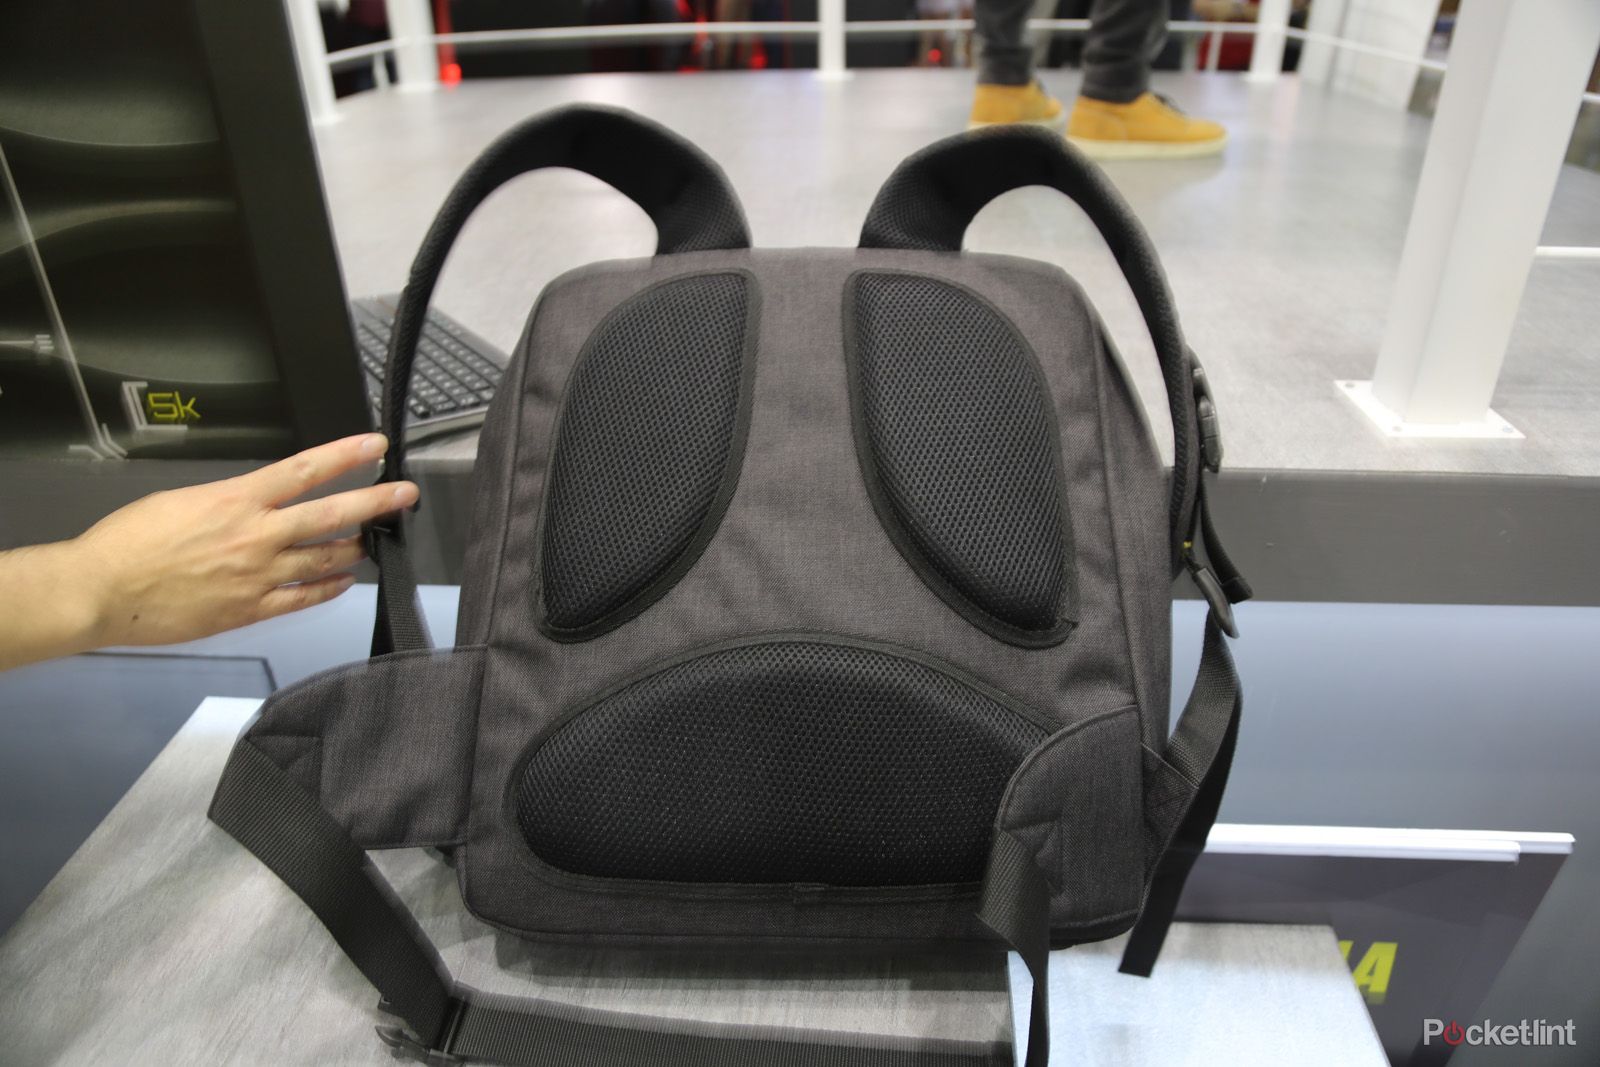 are backpack vr pcs really a thing now msi zotac and hp think so image 14